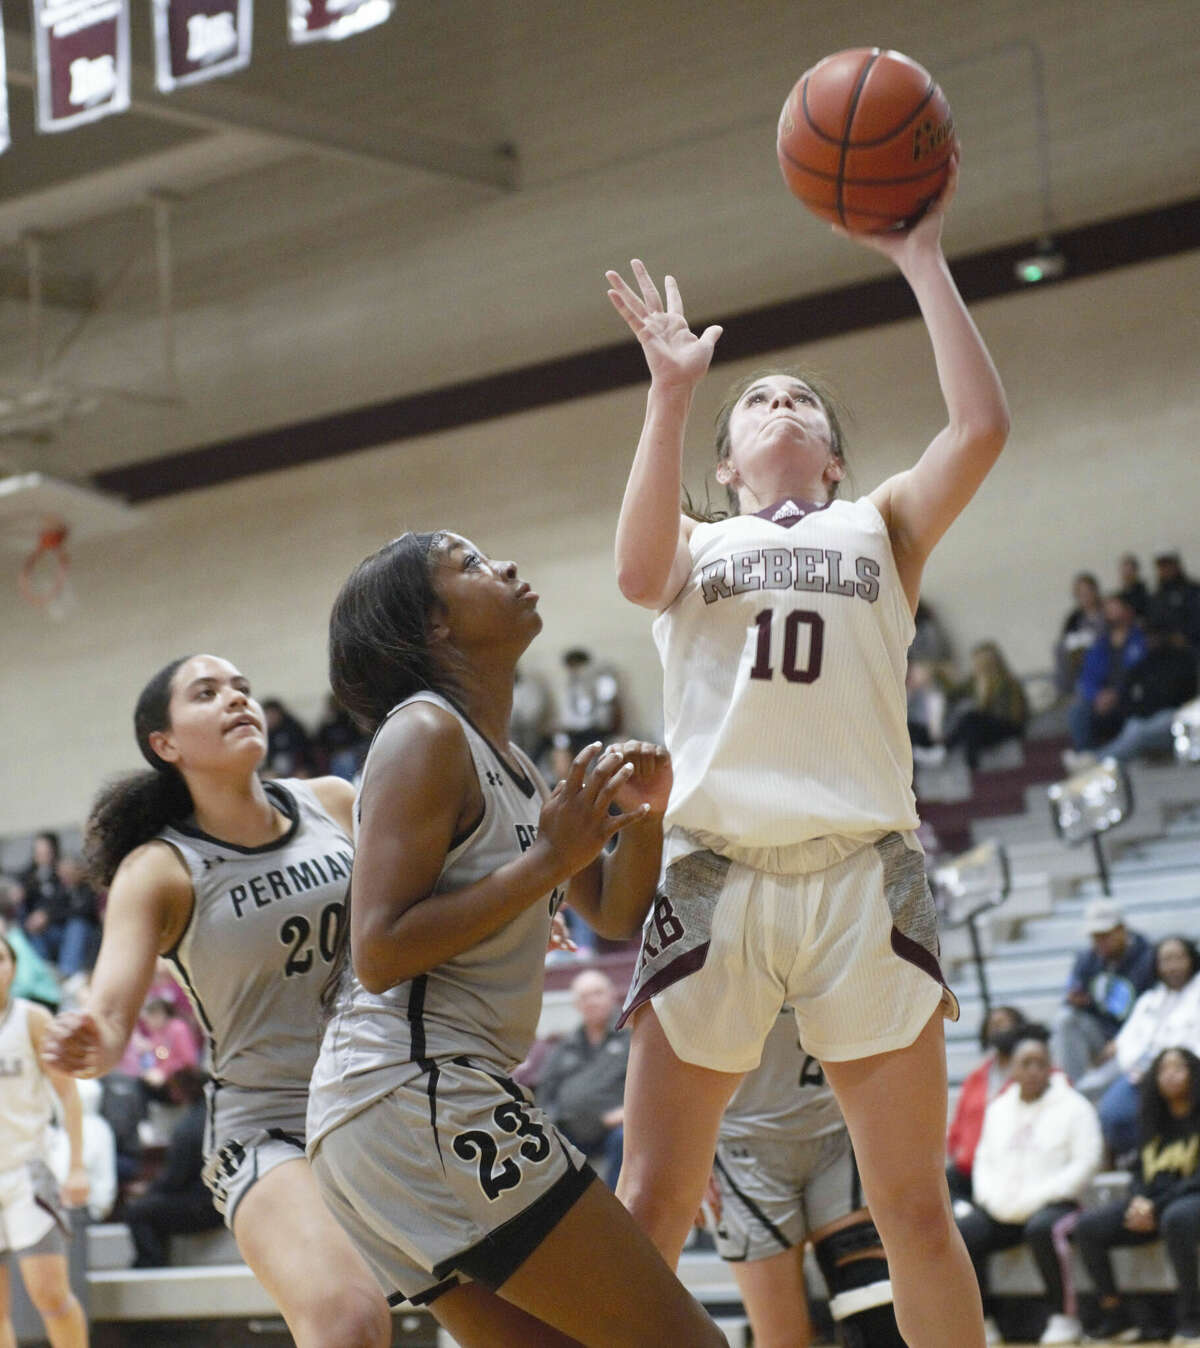 Legacy's Madyson Solis puts up a shot while being defended by Permian's Kimora Pierce (23) and Nadia Turner during a District 2-6A girls basketball game, Jan. 24 at Rebel Gymnasium. 